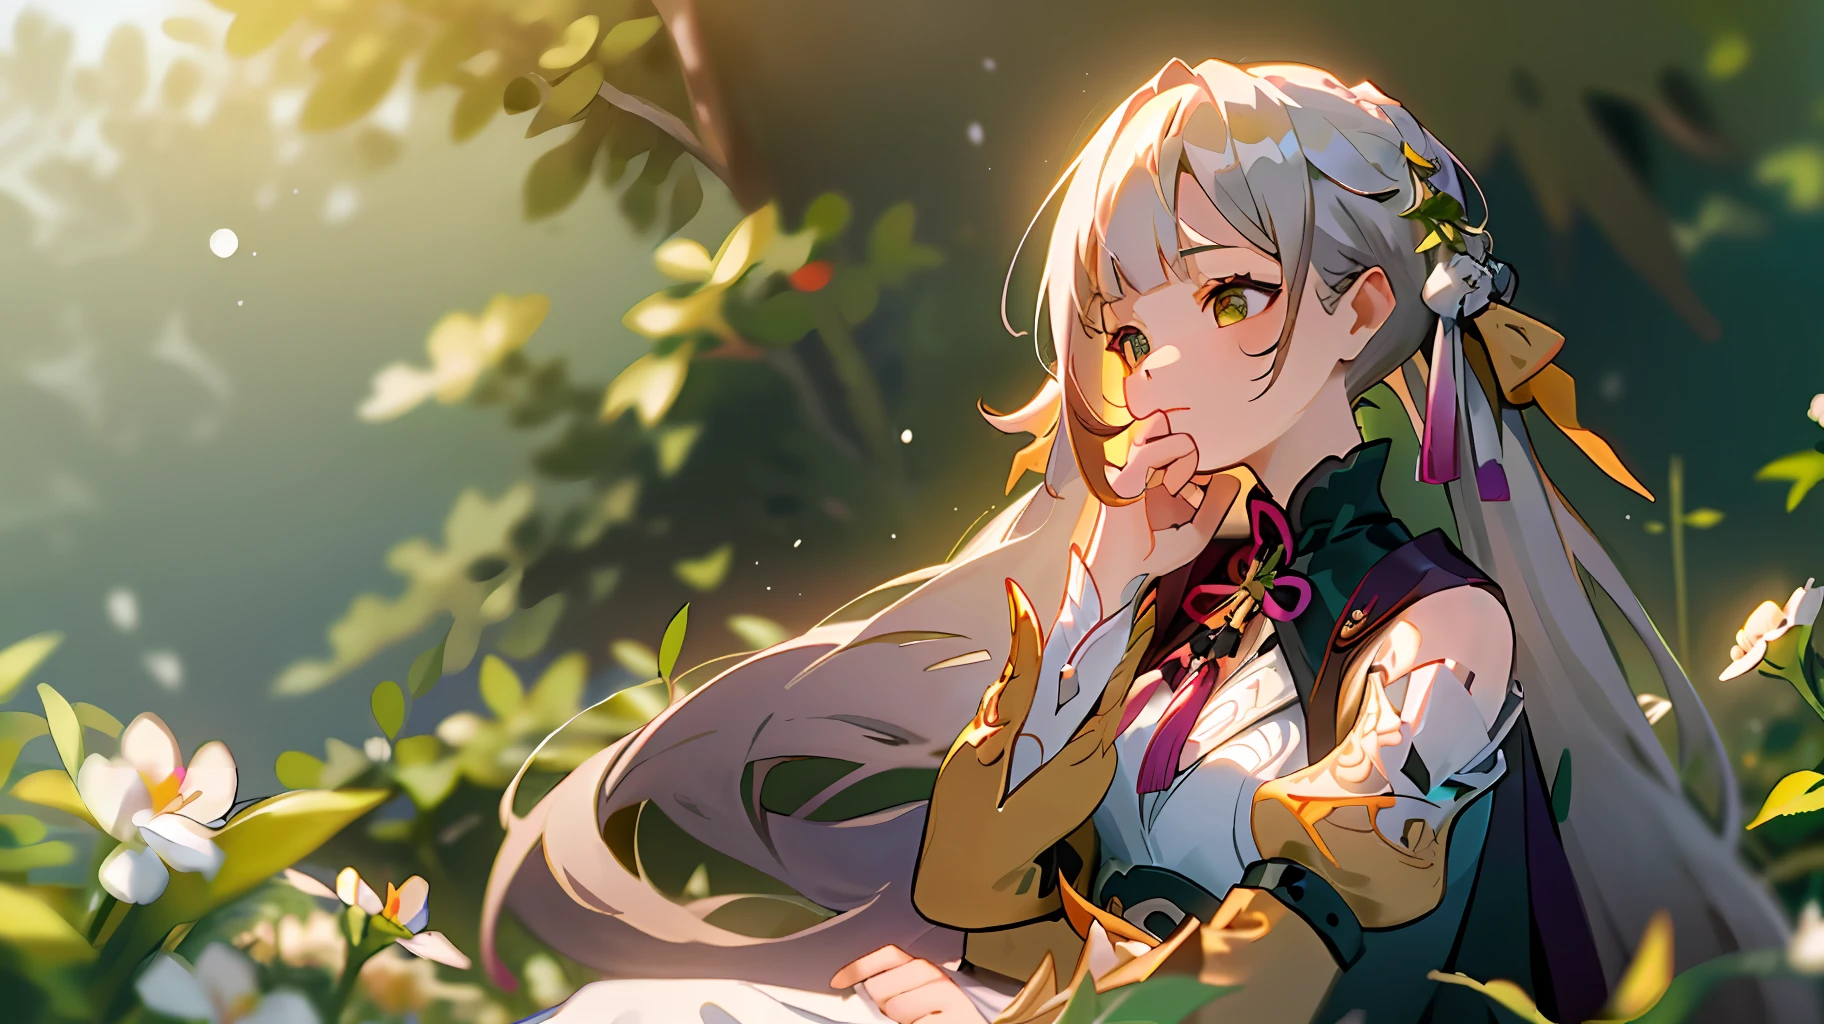 (masterpiece, best quality),1girl with long white hair sitting in a field of green plants and flowers, her hand under her chin, warm lighting, white dress, blurry foreground